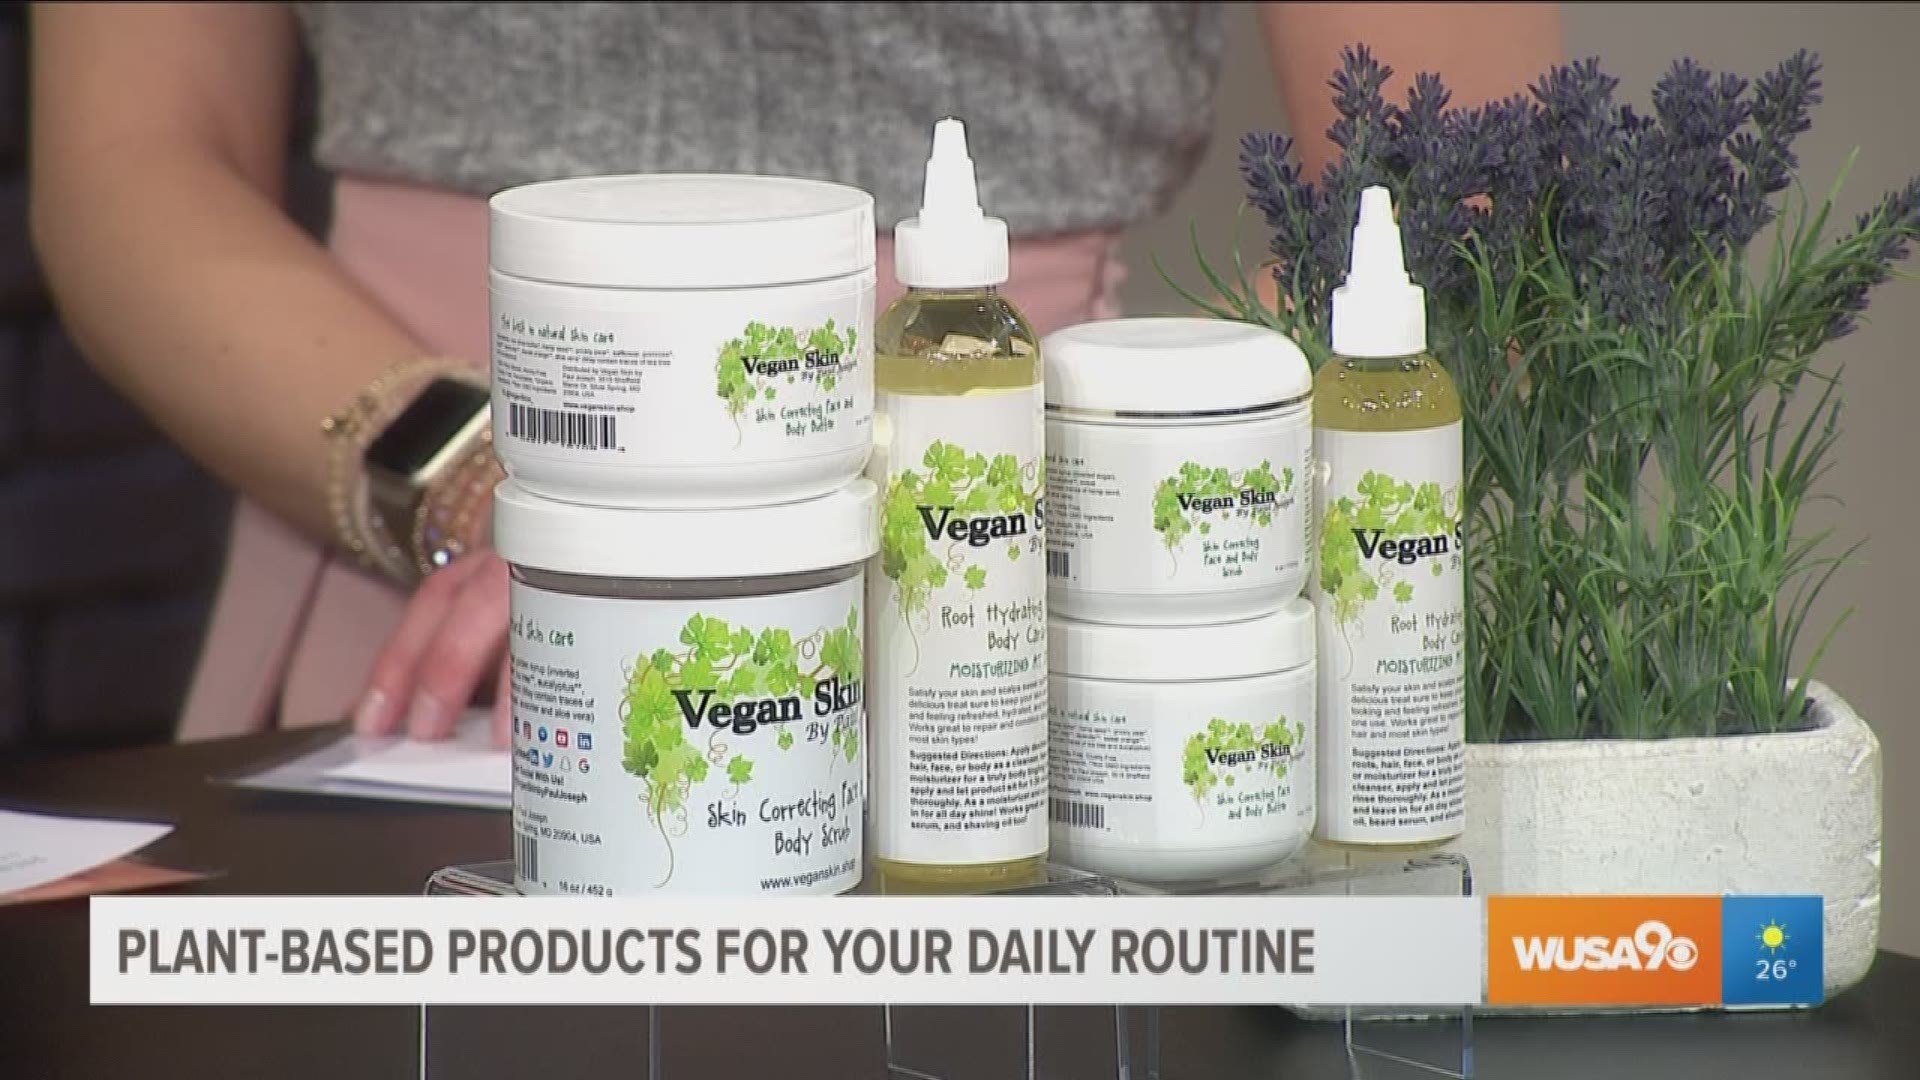 Paul Joseph, CEO of Vegan Skin, shares some easy ways to incorporate vegan products into your life.